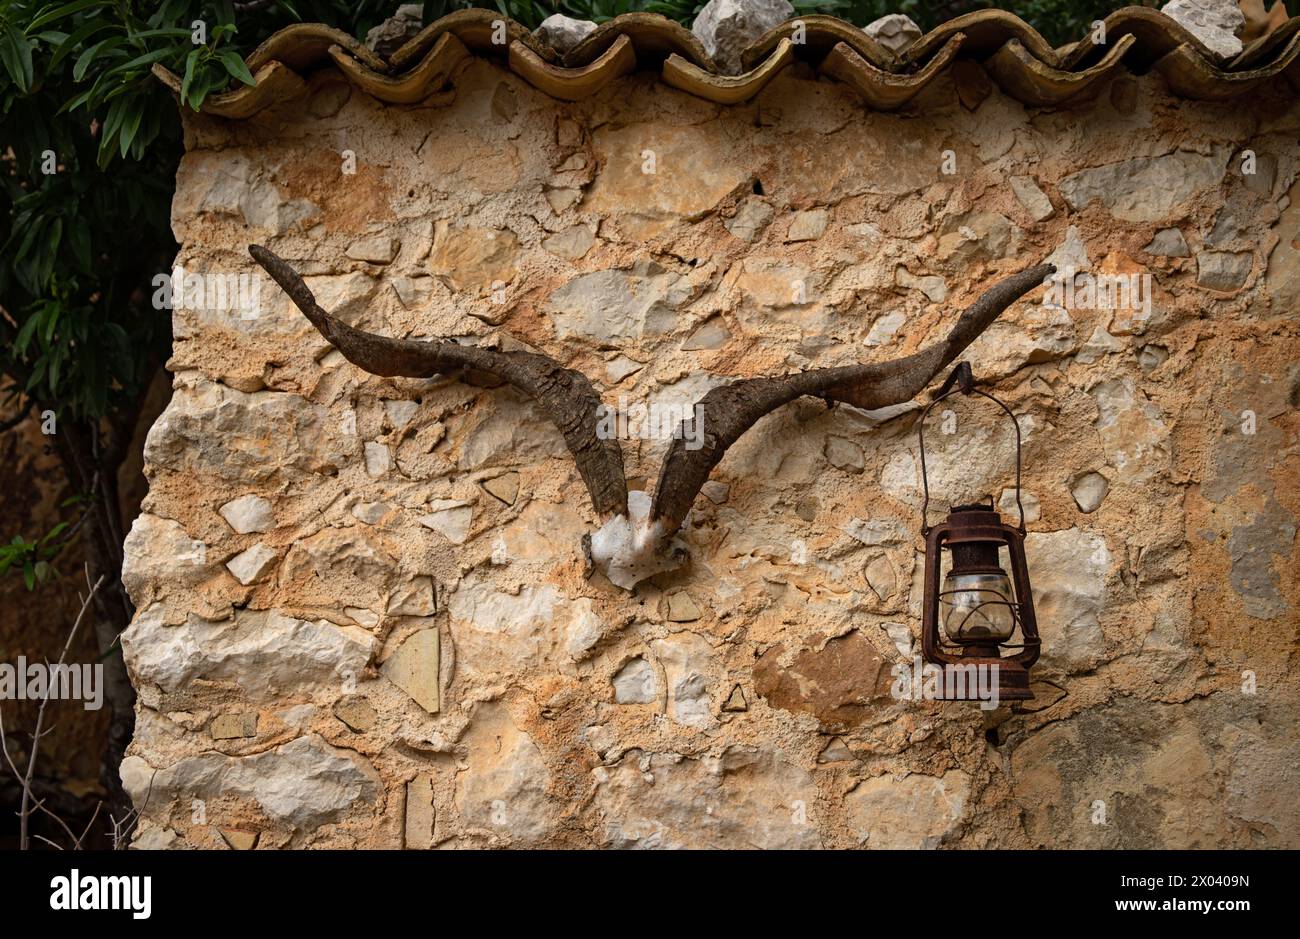 Goat skull on ancient vintage wall, brown aesthetics, old rusty vintage lamp light on a stone wall, Girgentana goat head, tall spiral horns Stock Photo